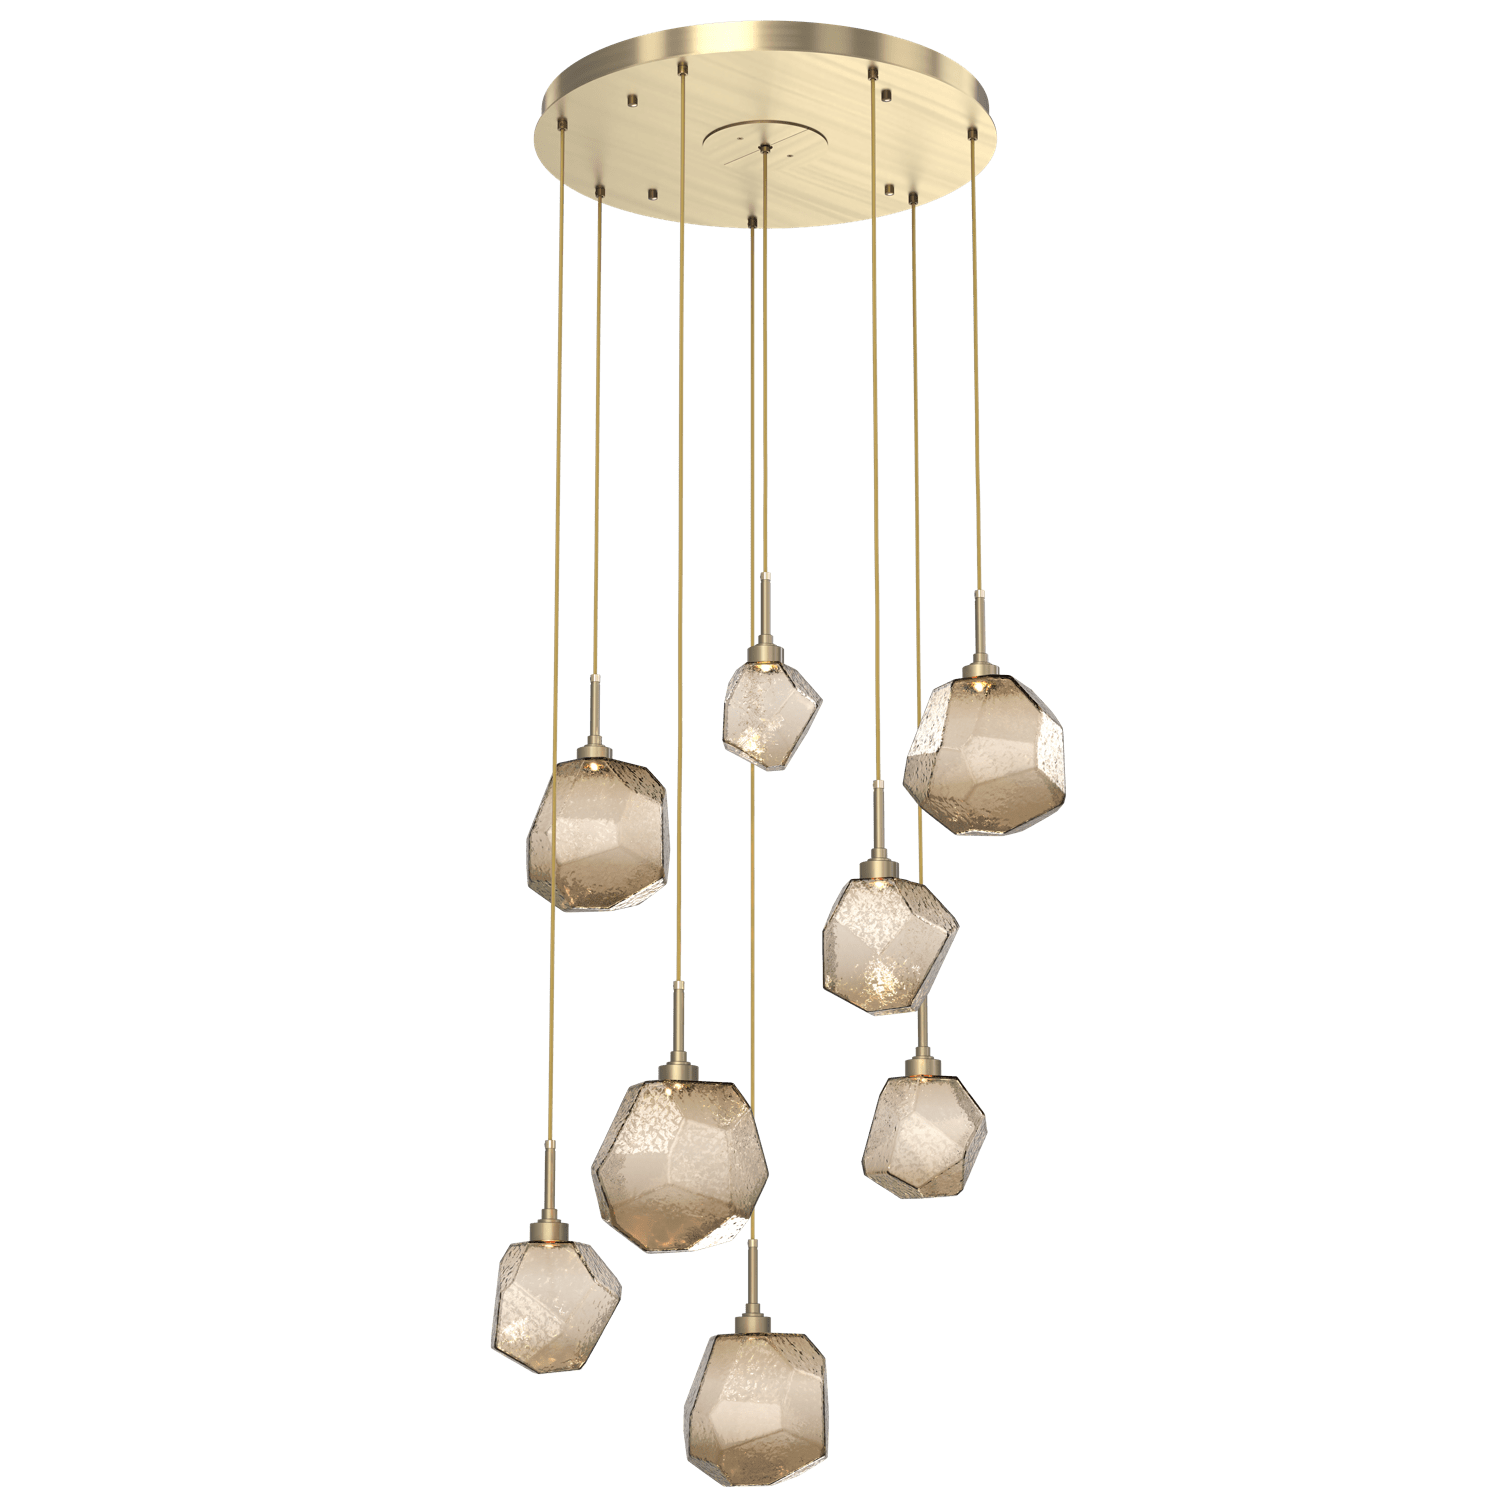 CHB0039-08-HB-B-Hammerton-Studio-Gem-8-light-round-pendant-chandelier-with-heritage-brass-finish-and-bronze-blown-glass-shades-and-LED-lamping